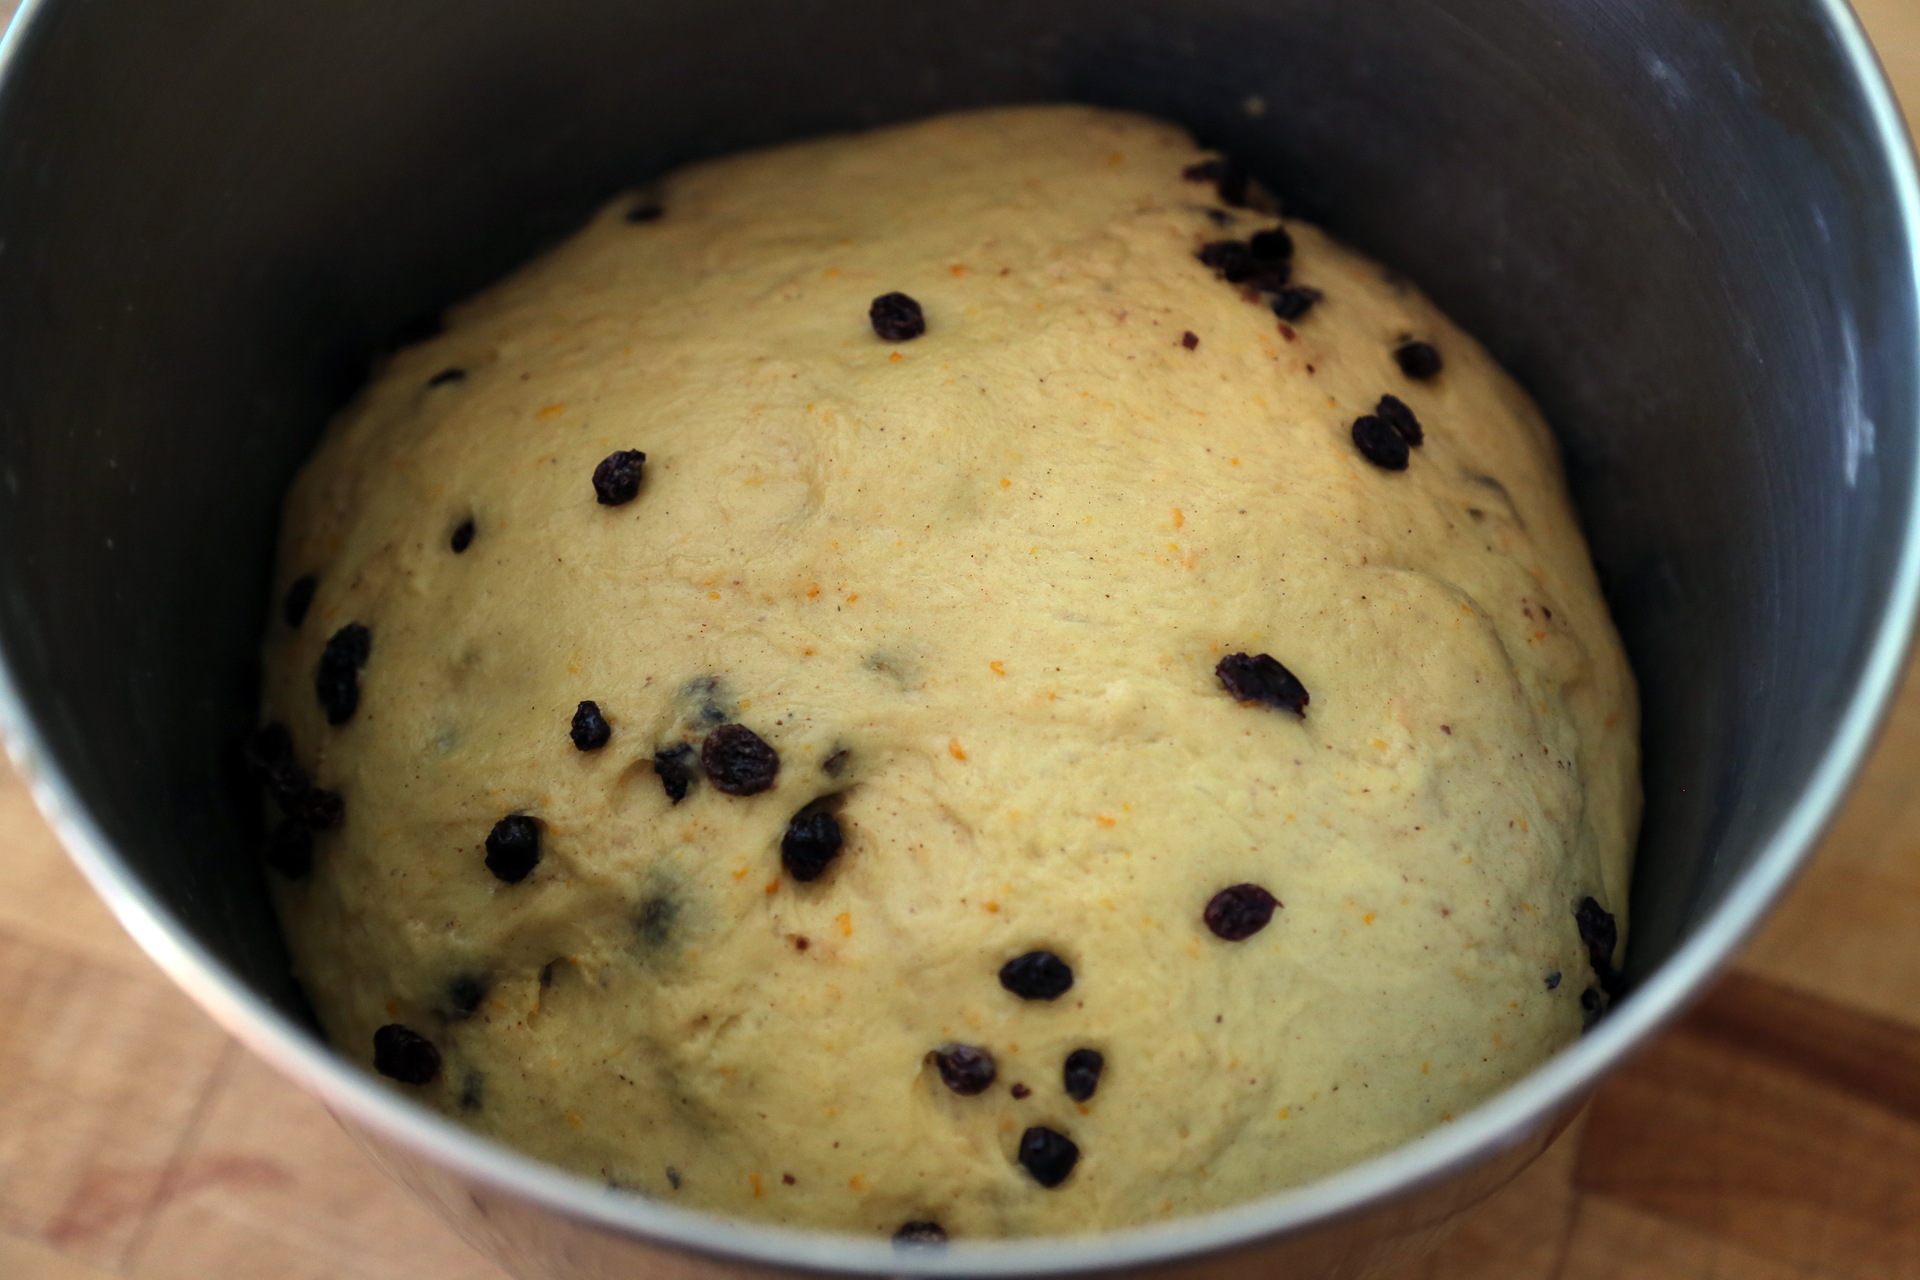 Let the dough rise at room temperature until it doubles, about 1 to 1 1/2 hours.